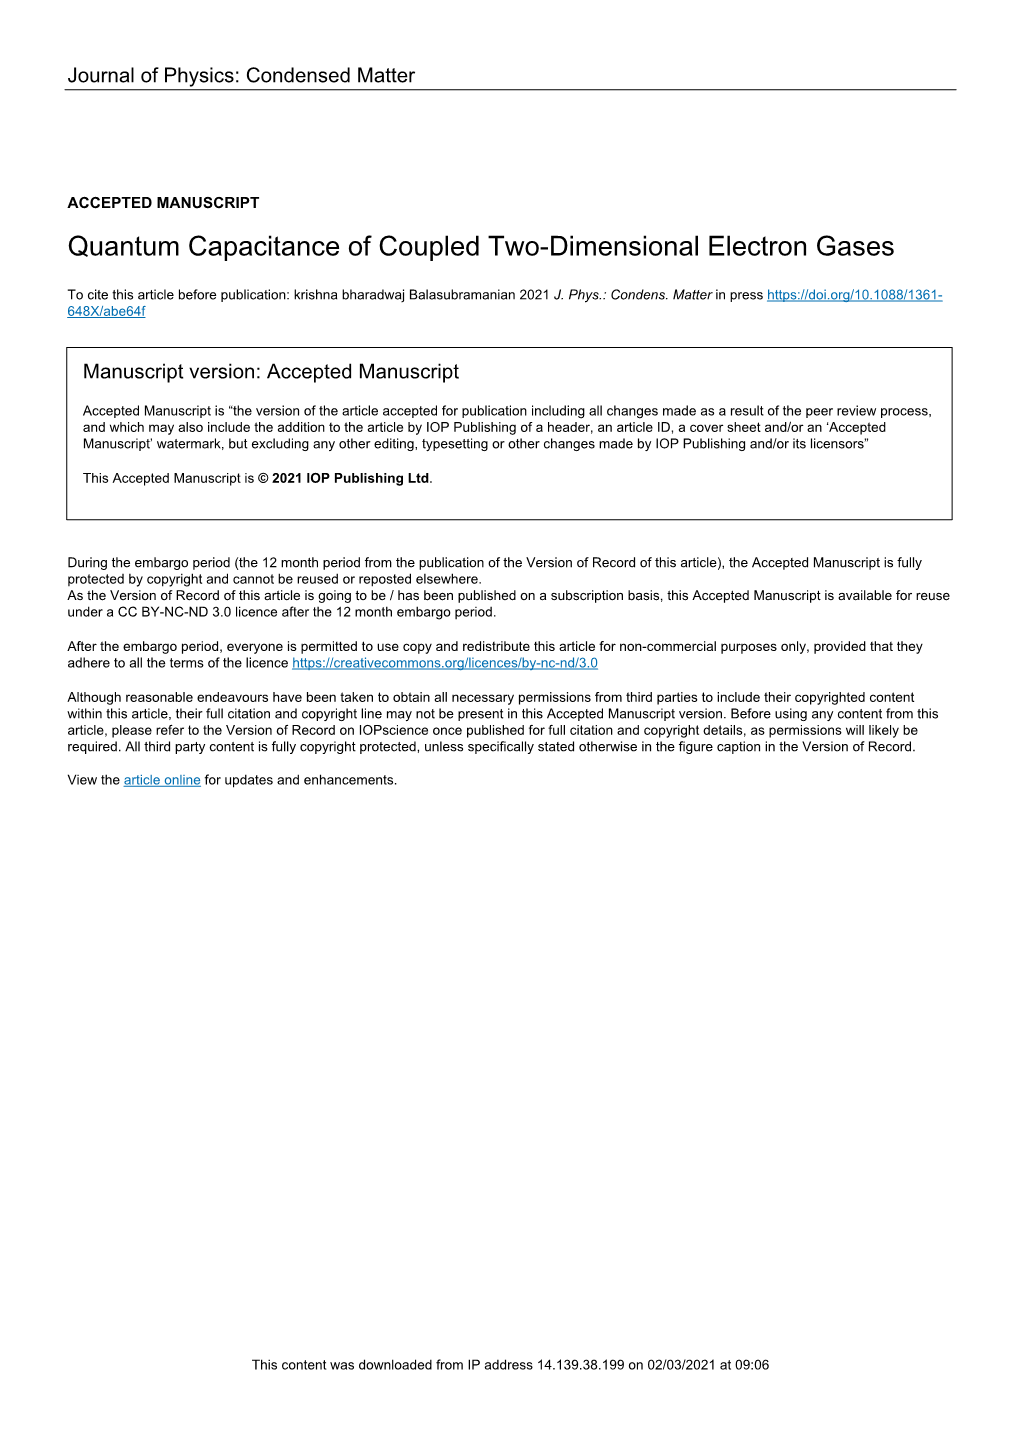 Quantum Capacitance of Coupled Two-Dimensional Electron Gases